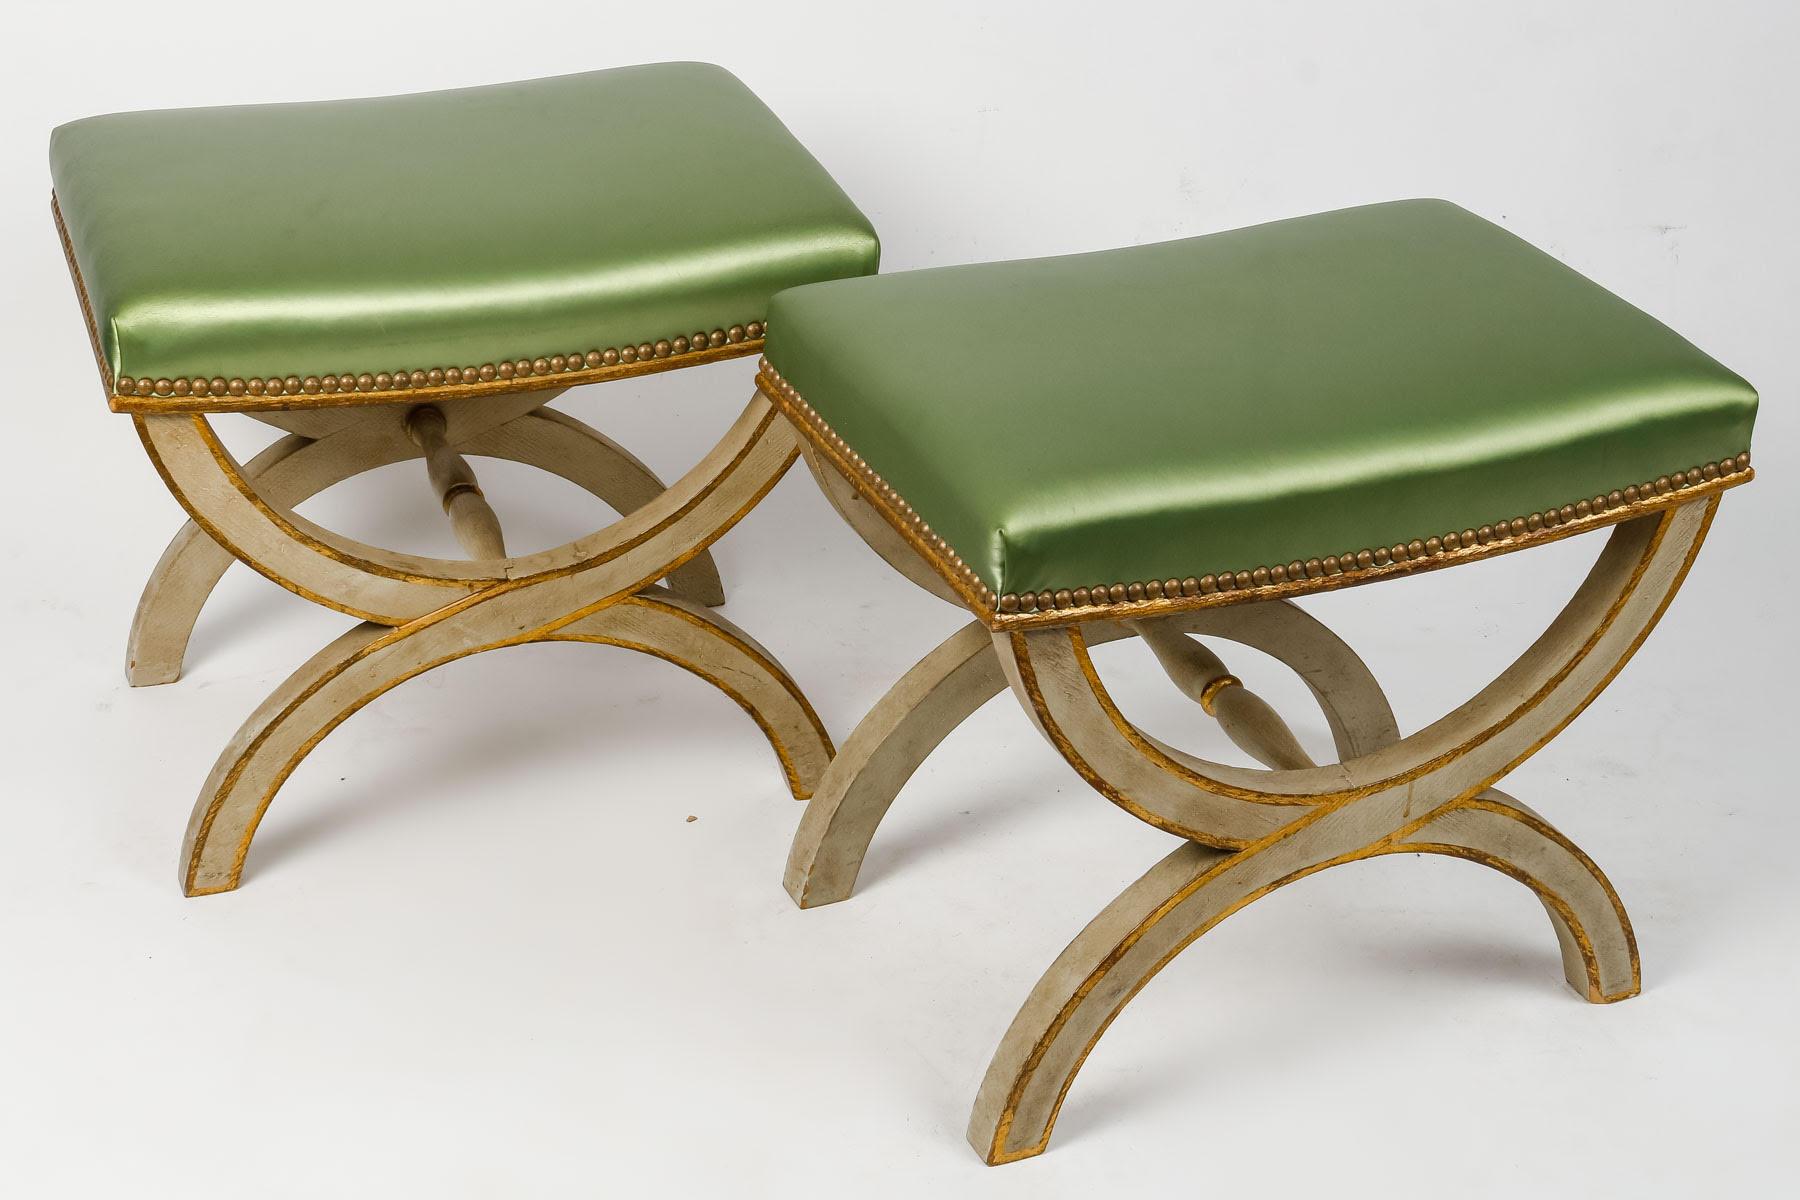 Pair of Lacquered Wood X-shaped Stools, Early 20th Century.

Pair of lacquered and gilded wooden X-shaped stools, satin fabric, early 20th century
h: 40cm, w: 46cm, d: 32cm